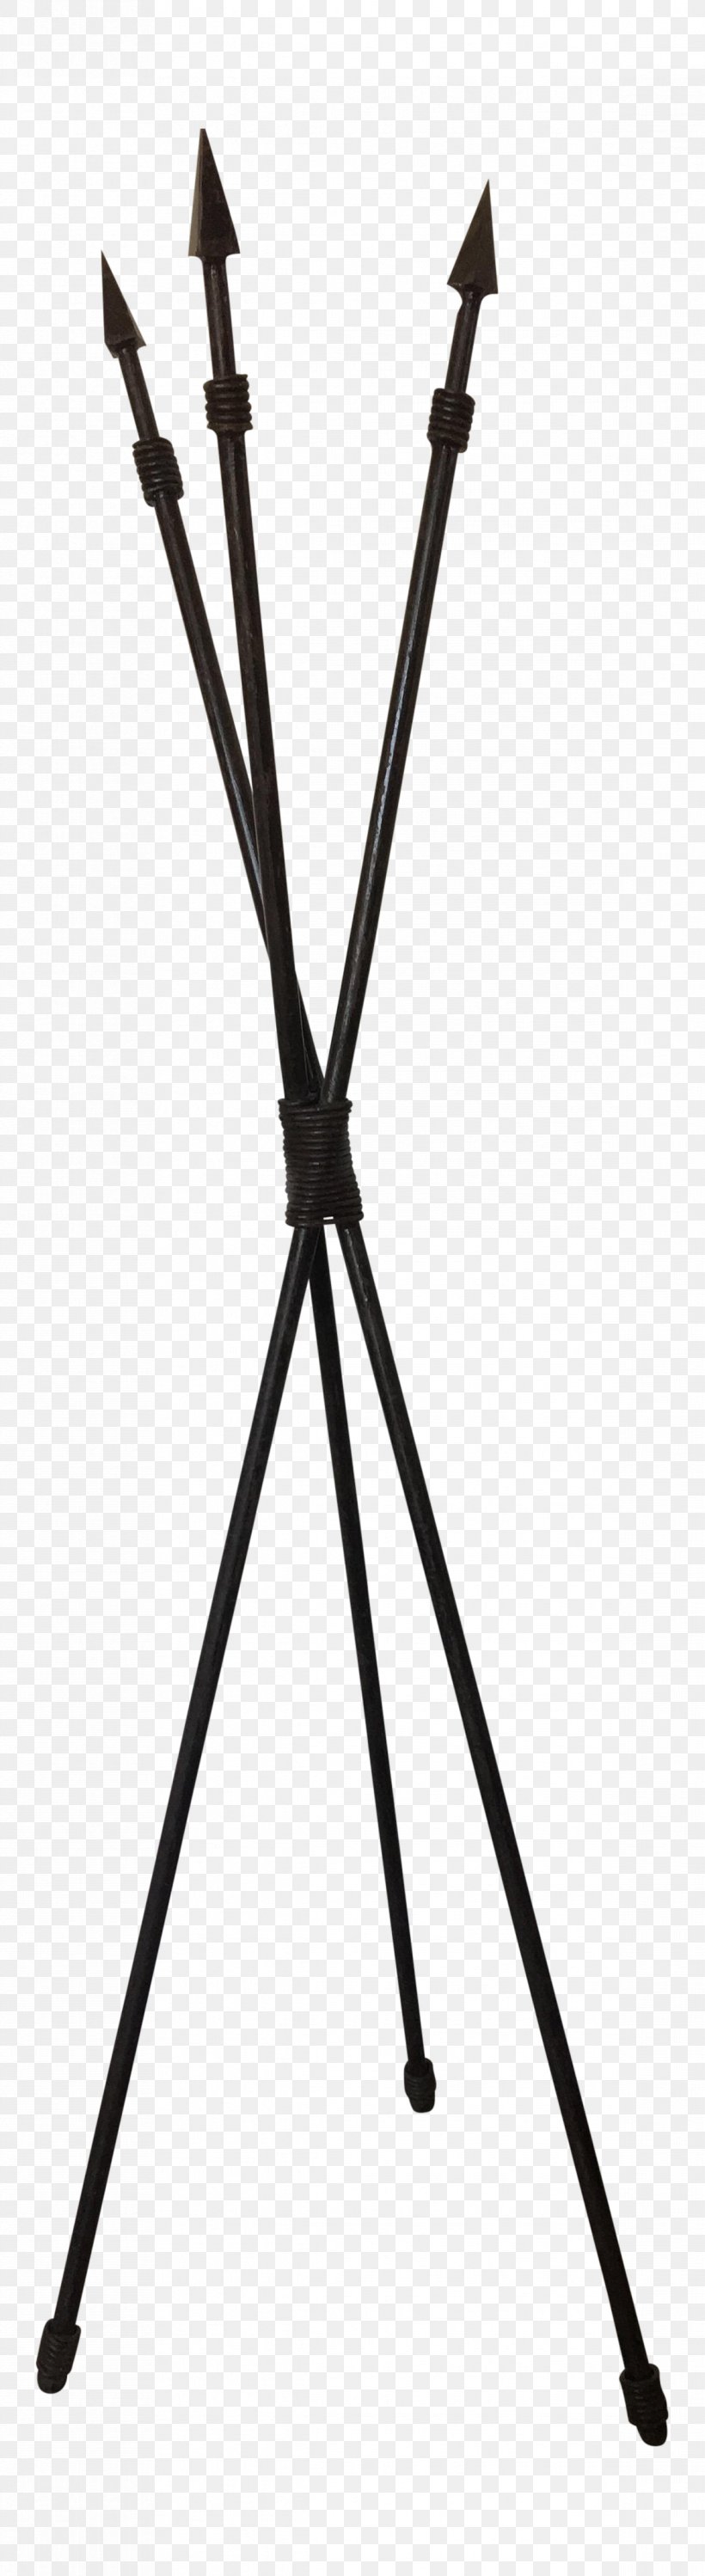 Musical Instrument Accessory Line Angle, PNG, 1167x4266px, Musical Instrument Accessory, Musical Instruments, Tripod Download Free